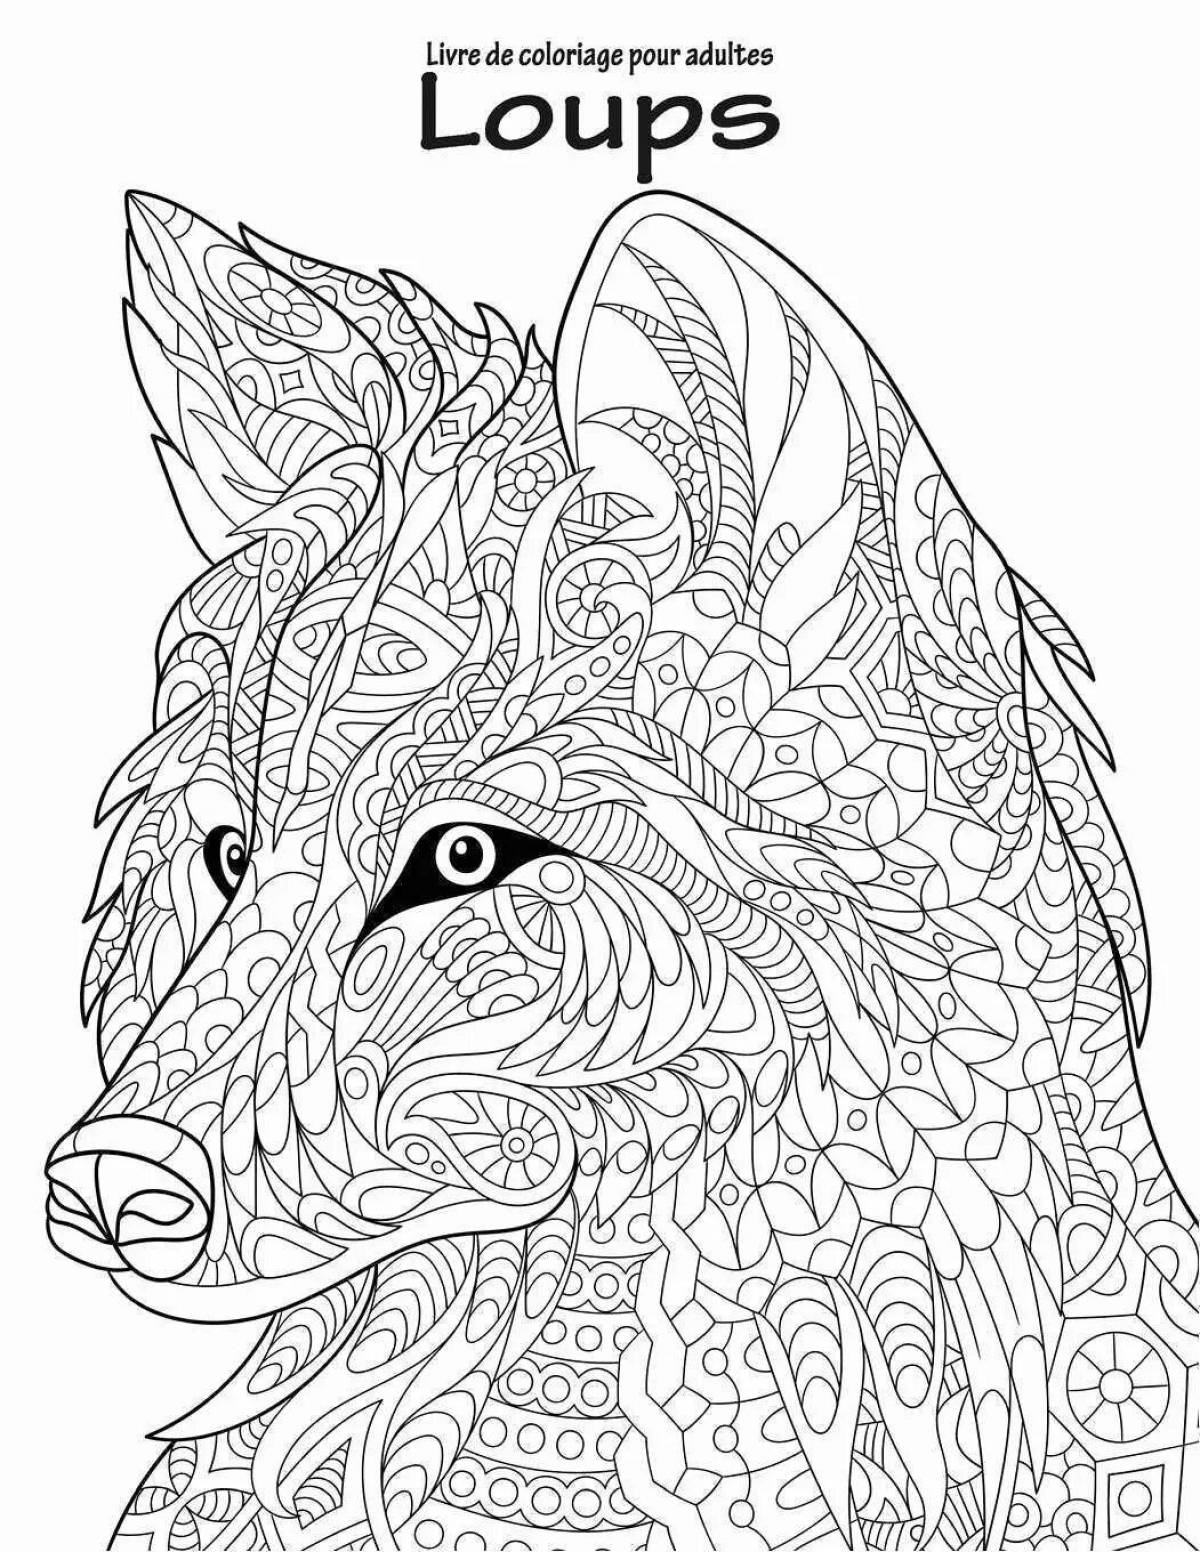 Coloring book valiant wolf